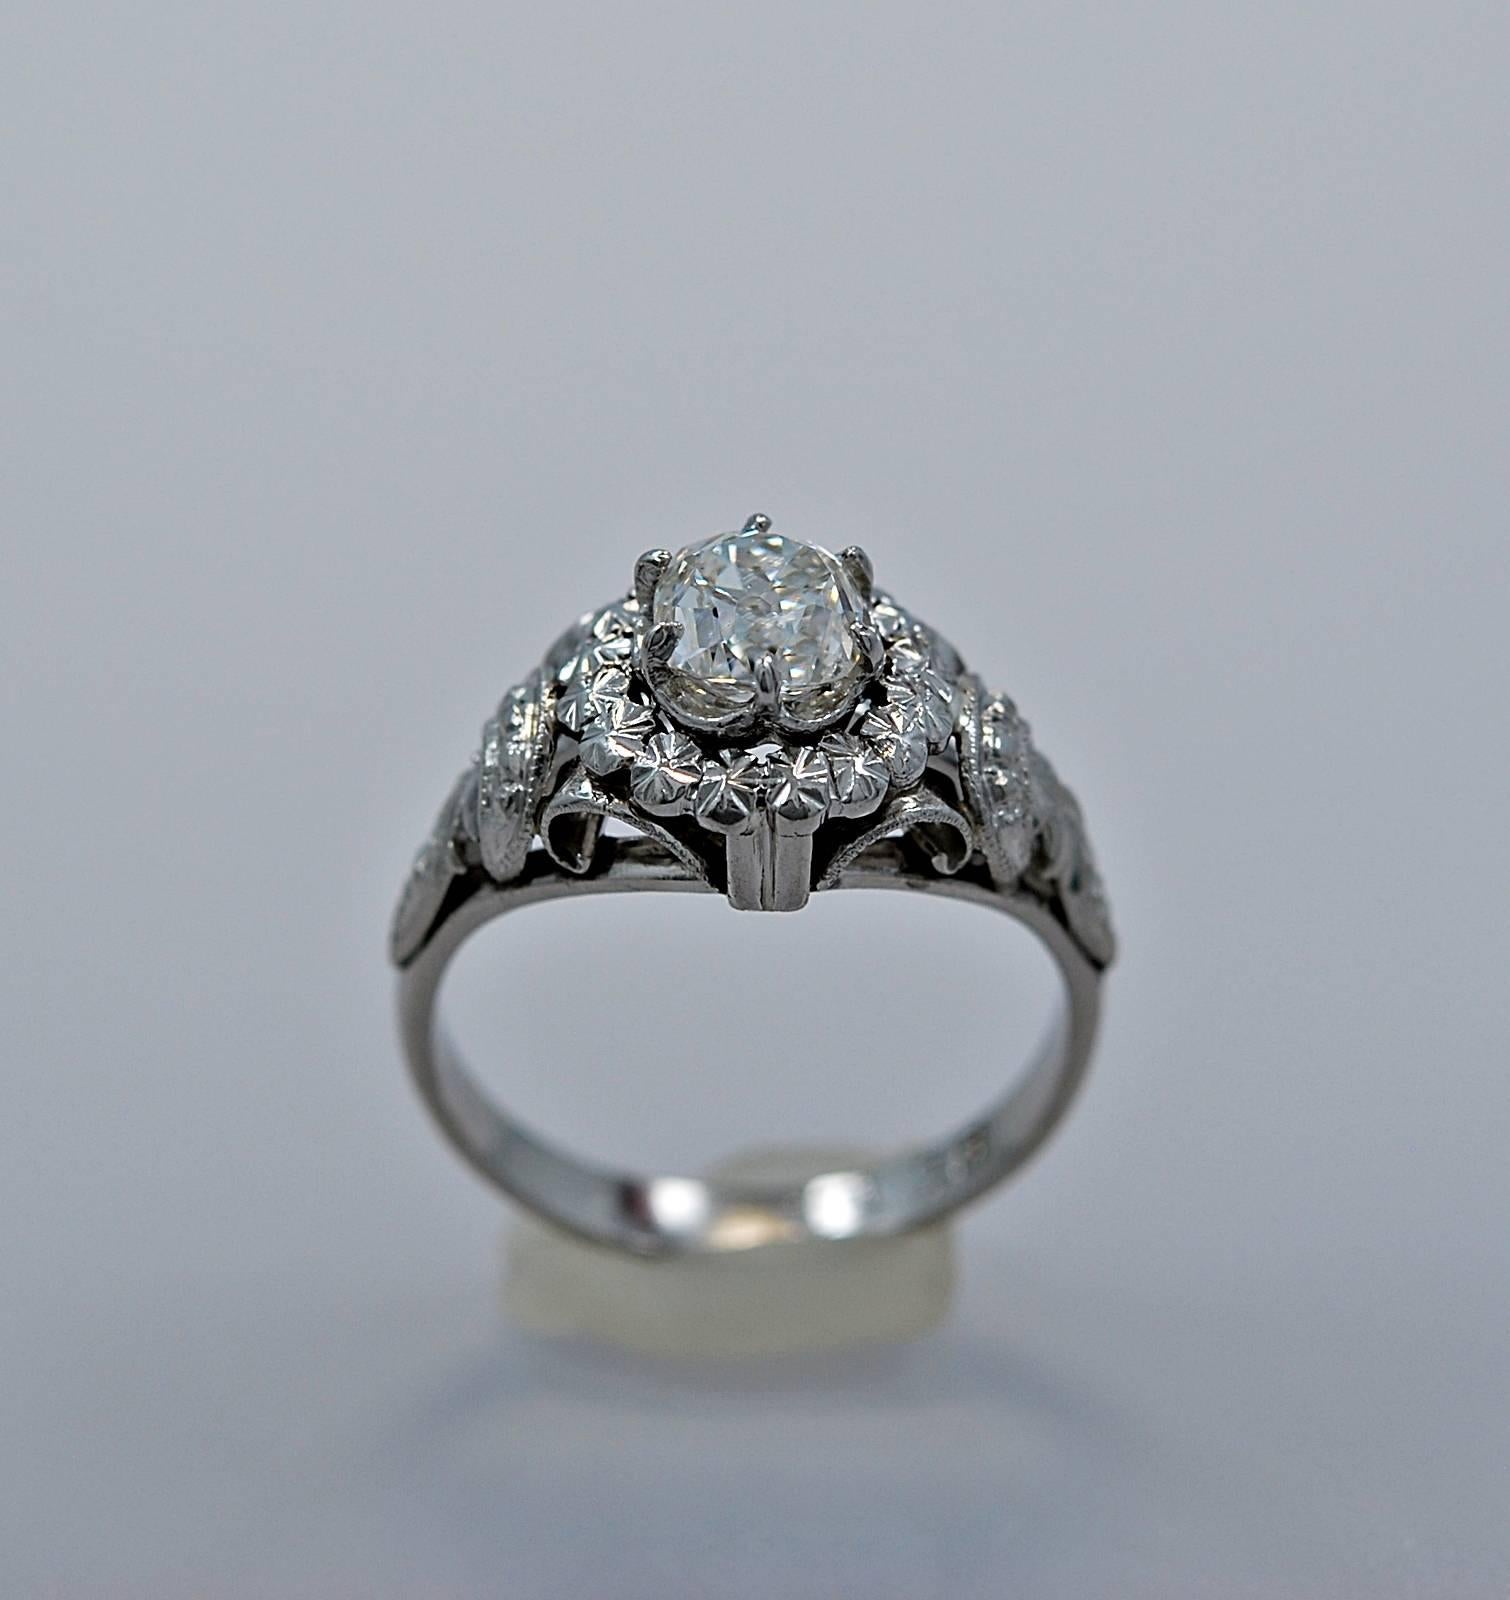 An Art Deco diamond engagement ring crafted in platinum. This ring features a .85ct. apx. diamond of SI2 clarity and H-I color. This is a fantastic ring in its design. It exhibits scroll work, wonderful piercing, milgrain and small flowers